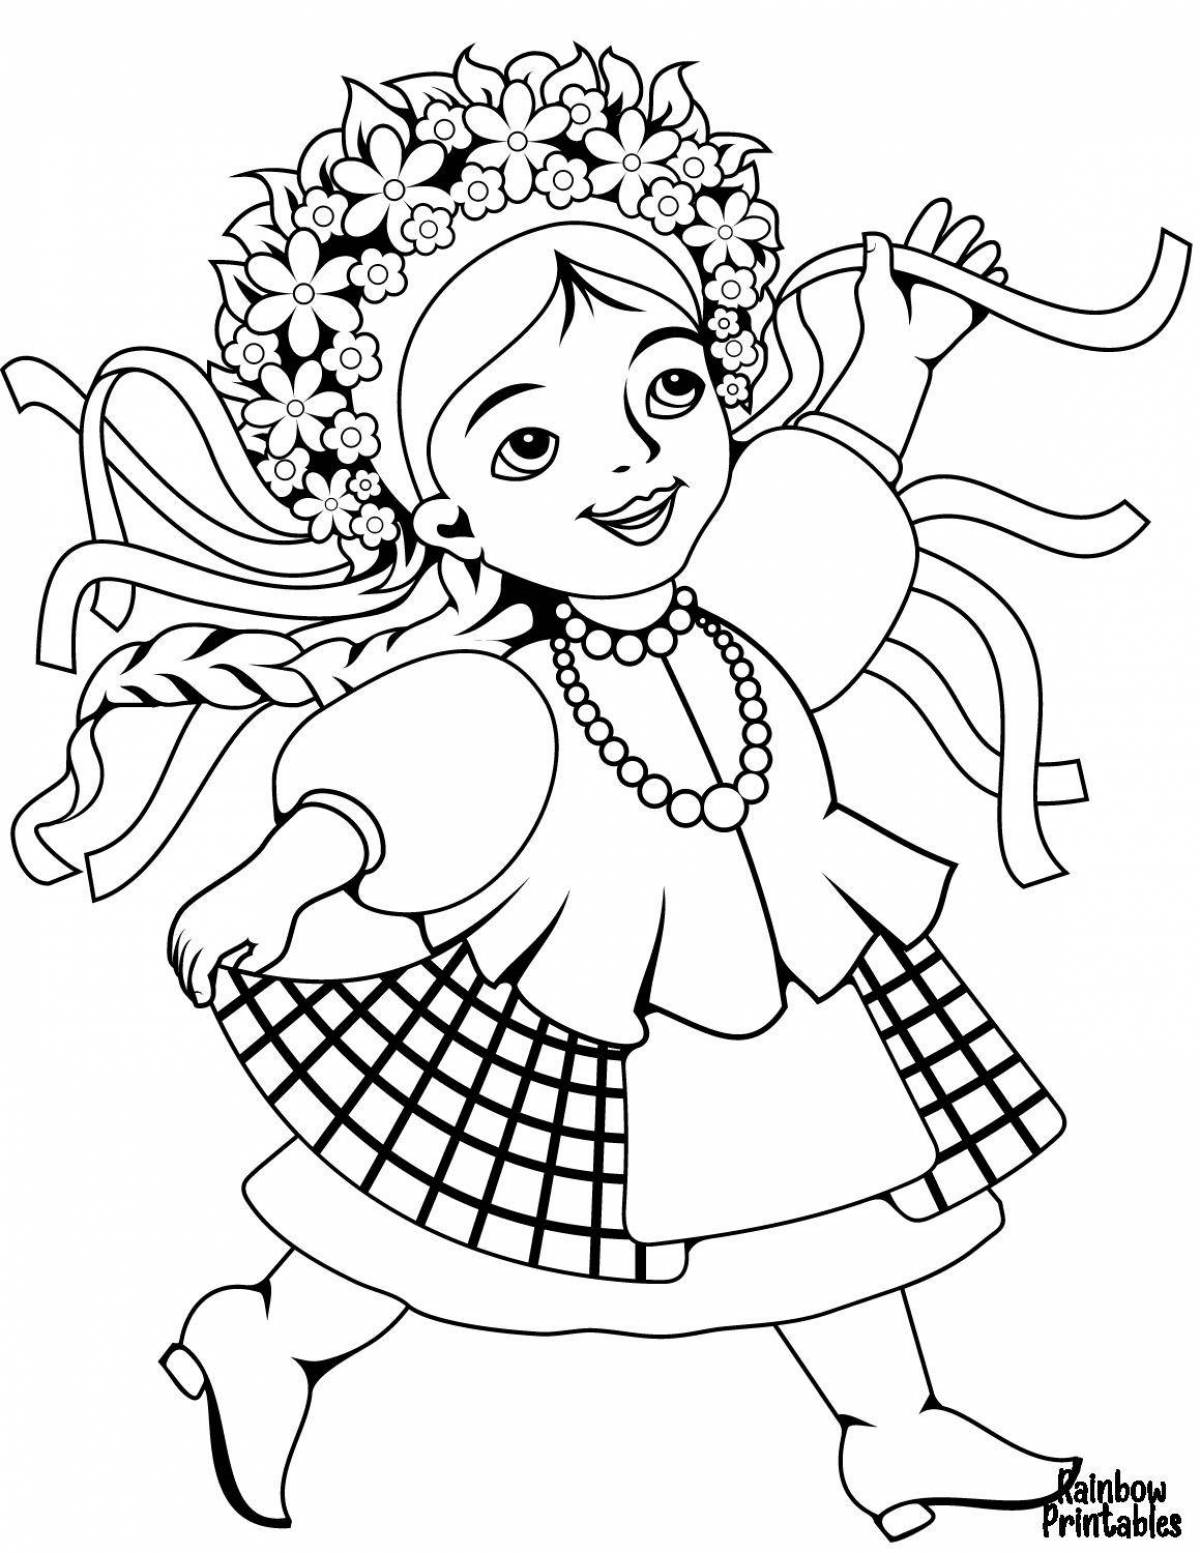 Merry Belarus coloring pages for kids